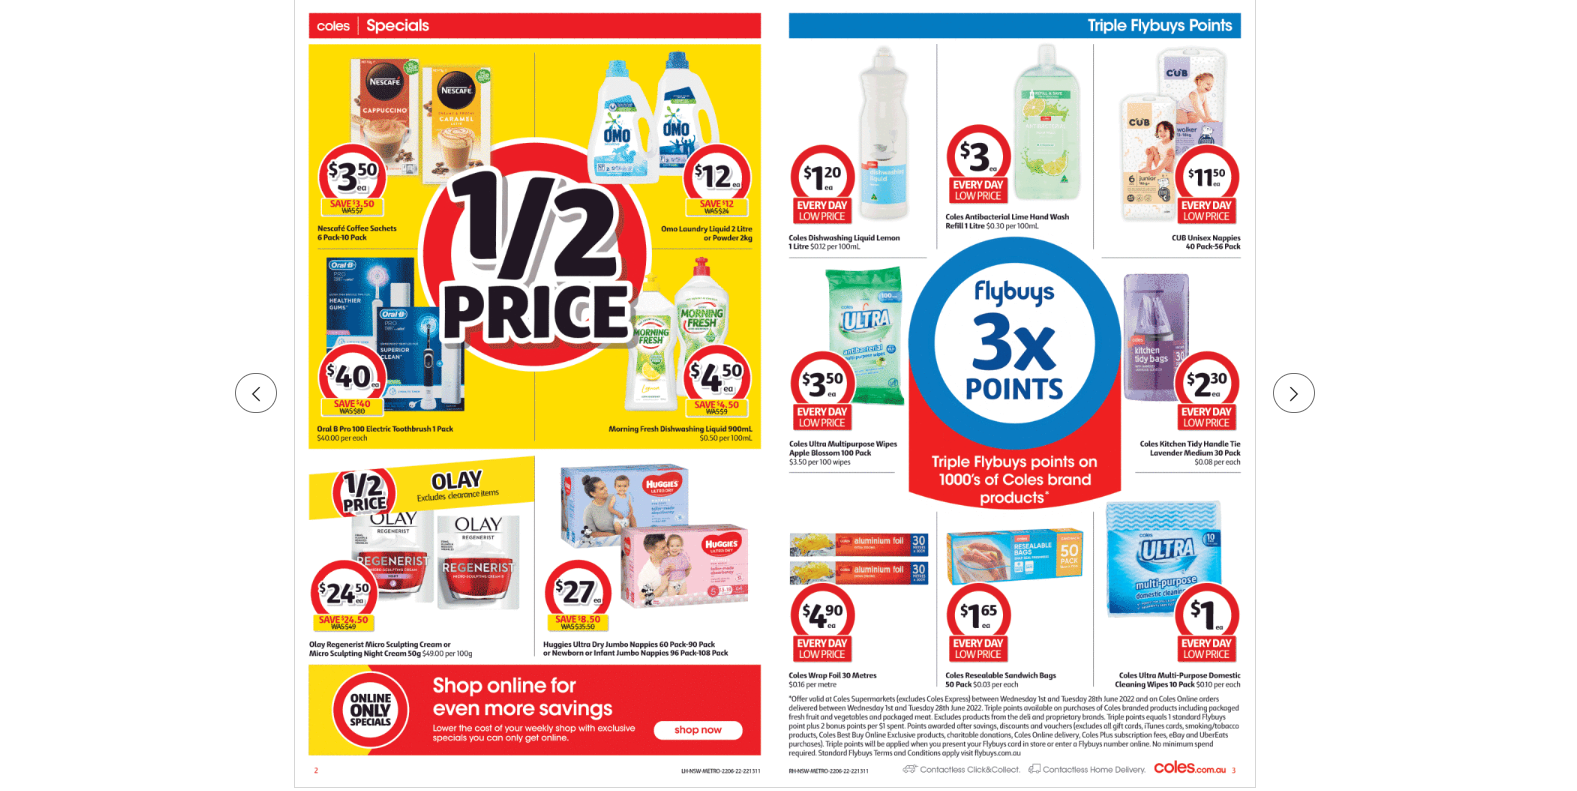 Coles this week's catalogue up to 50% OFF on groceries, beauty&everyday essentials(until 28th June)